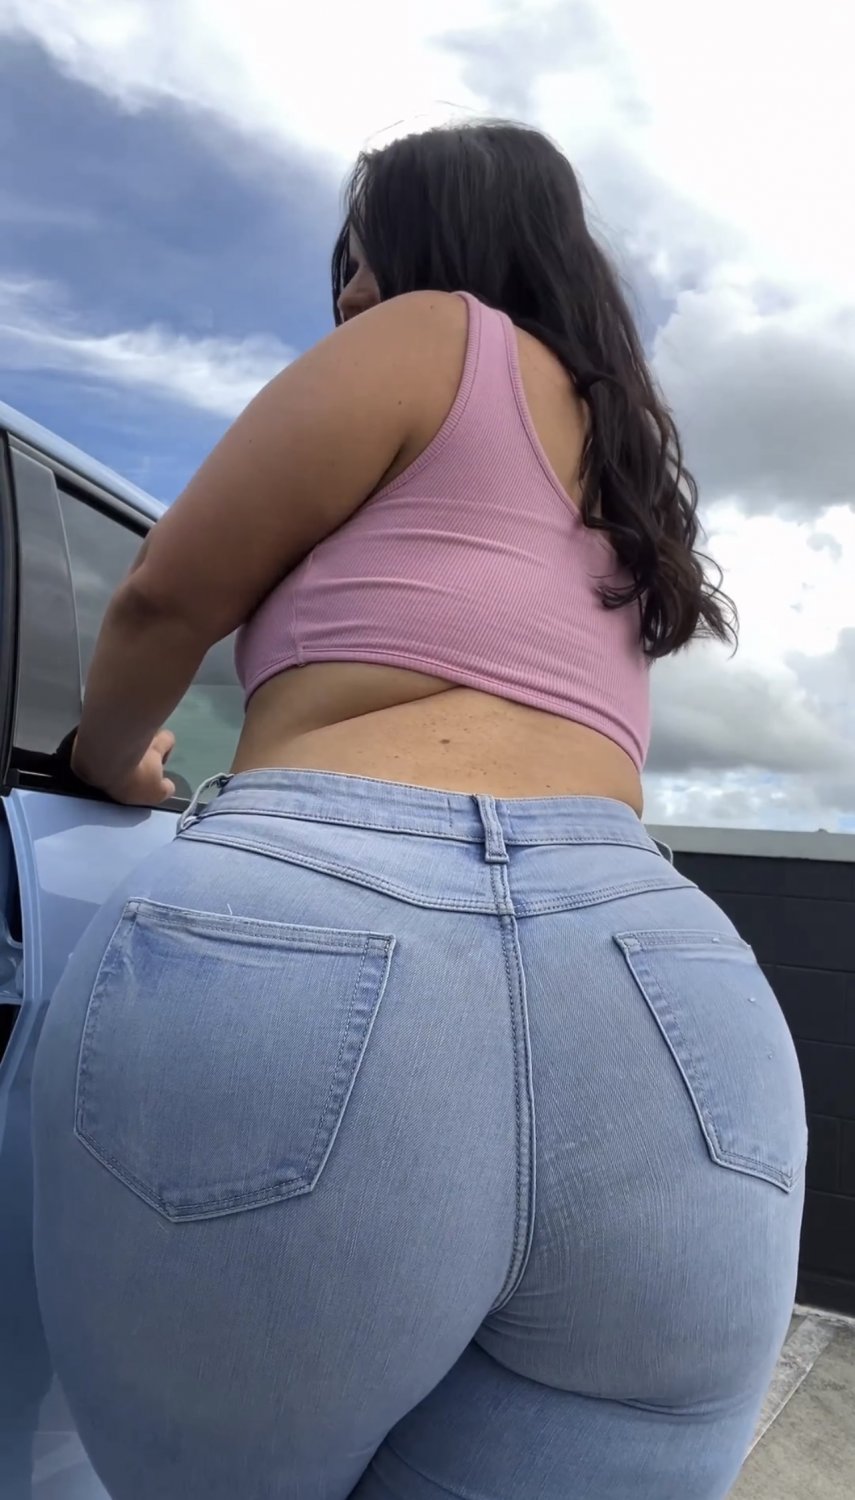 Hot Jeans - Hot Thick PAWG In Sexy Jeans Cum Tribute 3 - Porn - EroMe